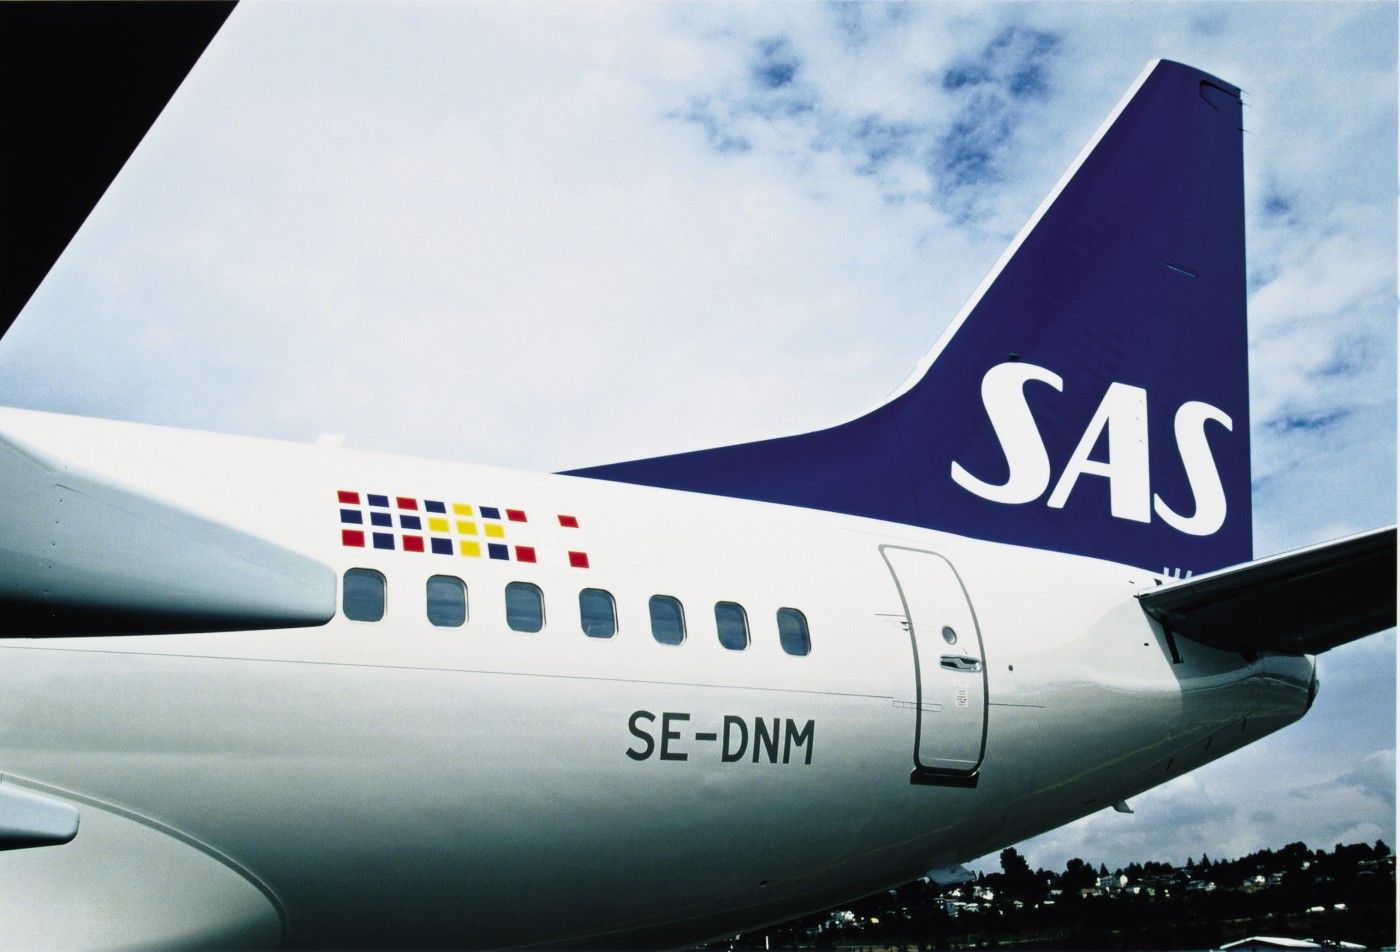 SAS returns to the ‘City of Angels’